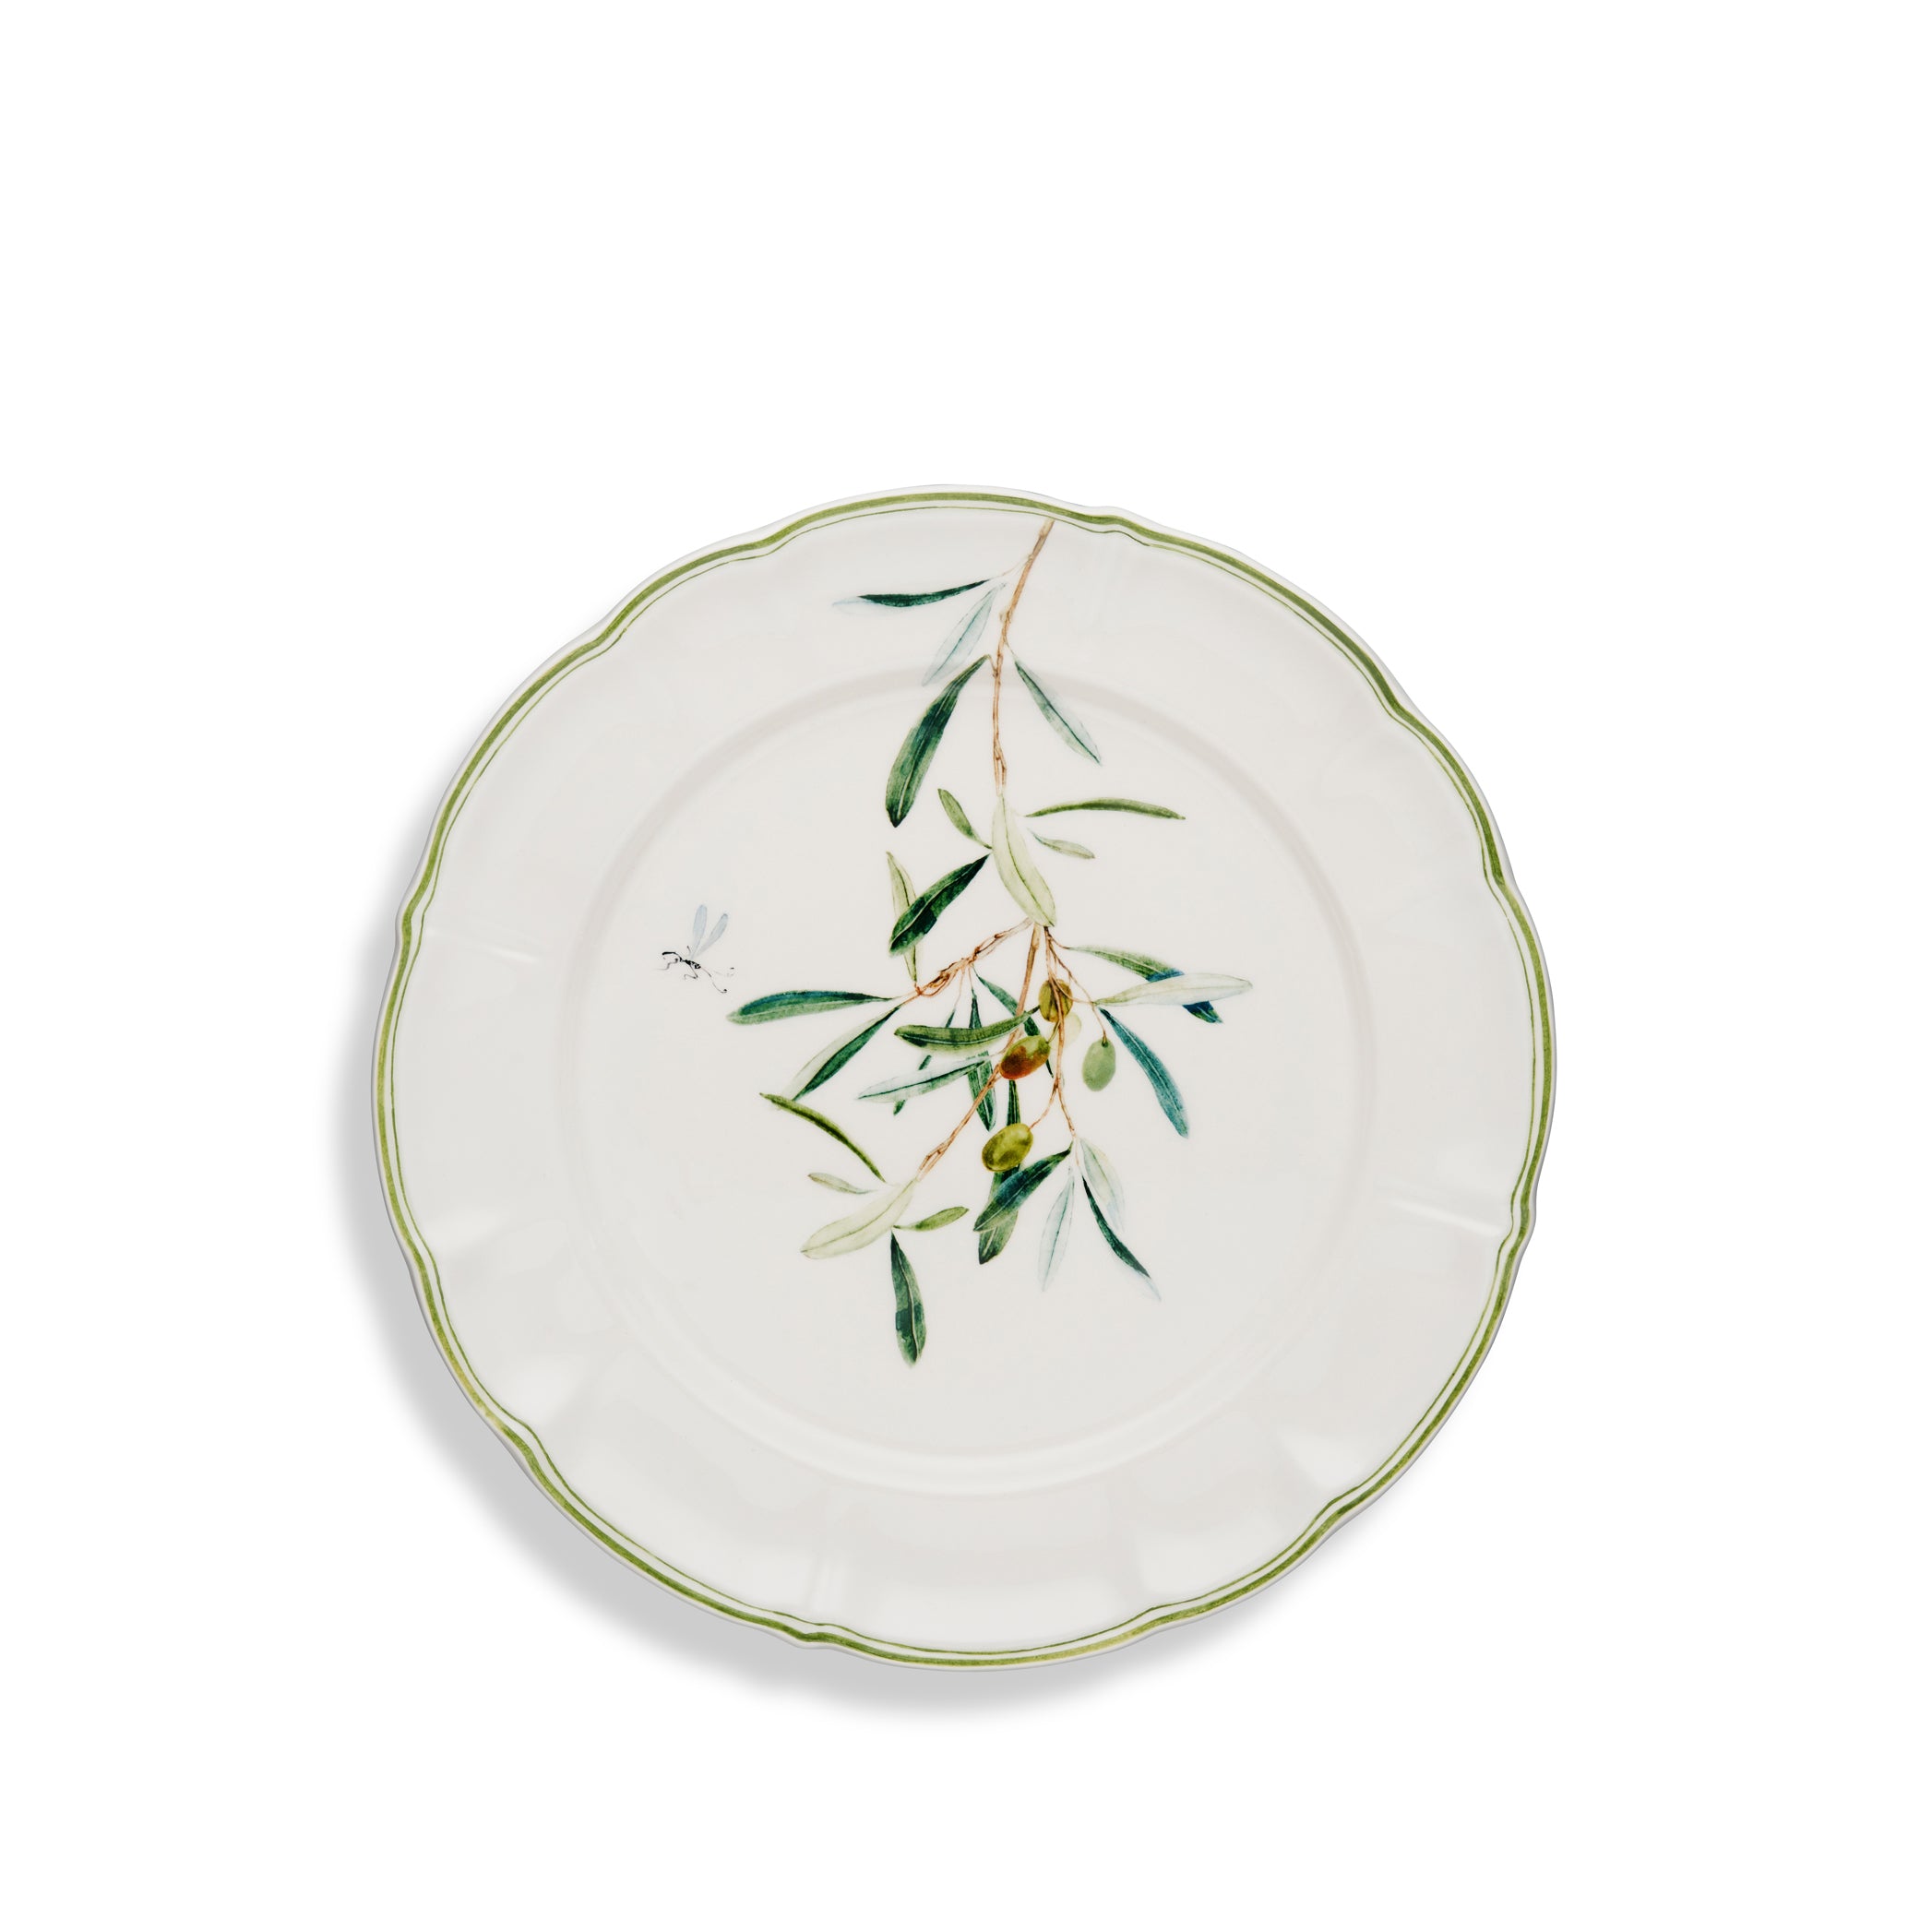 Olive Branch Scalloped Dinner Plate With Small Insect, 26cm